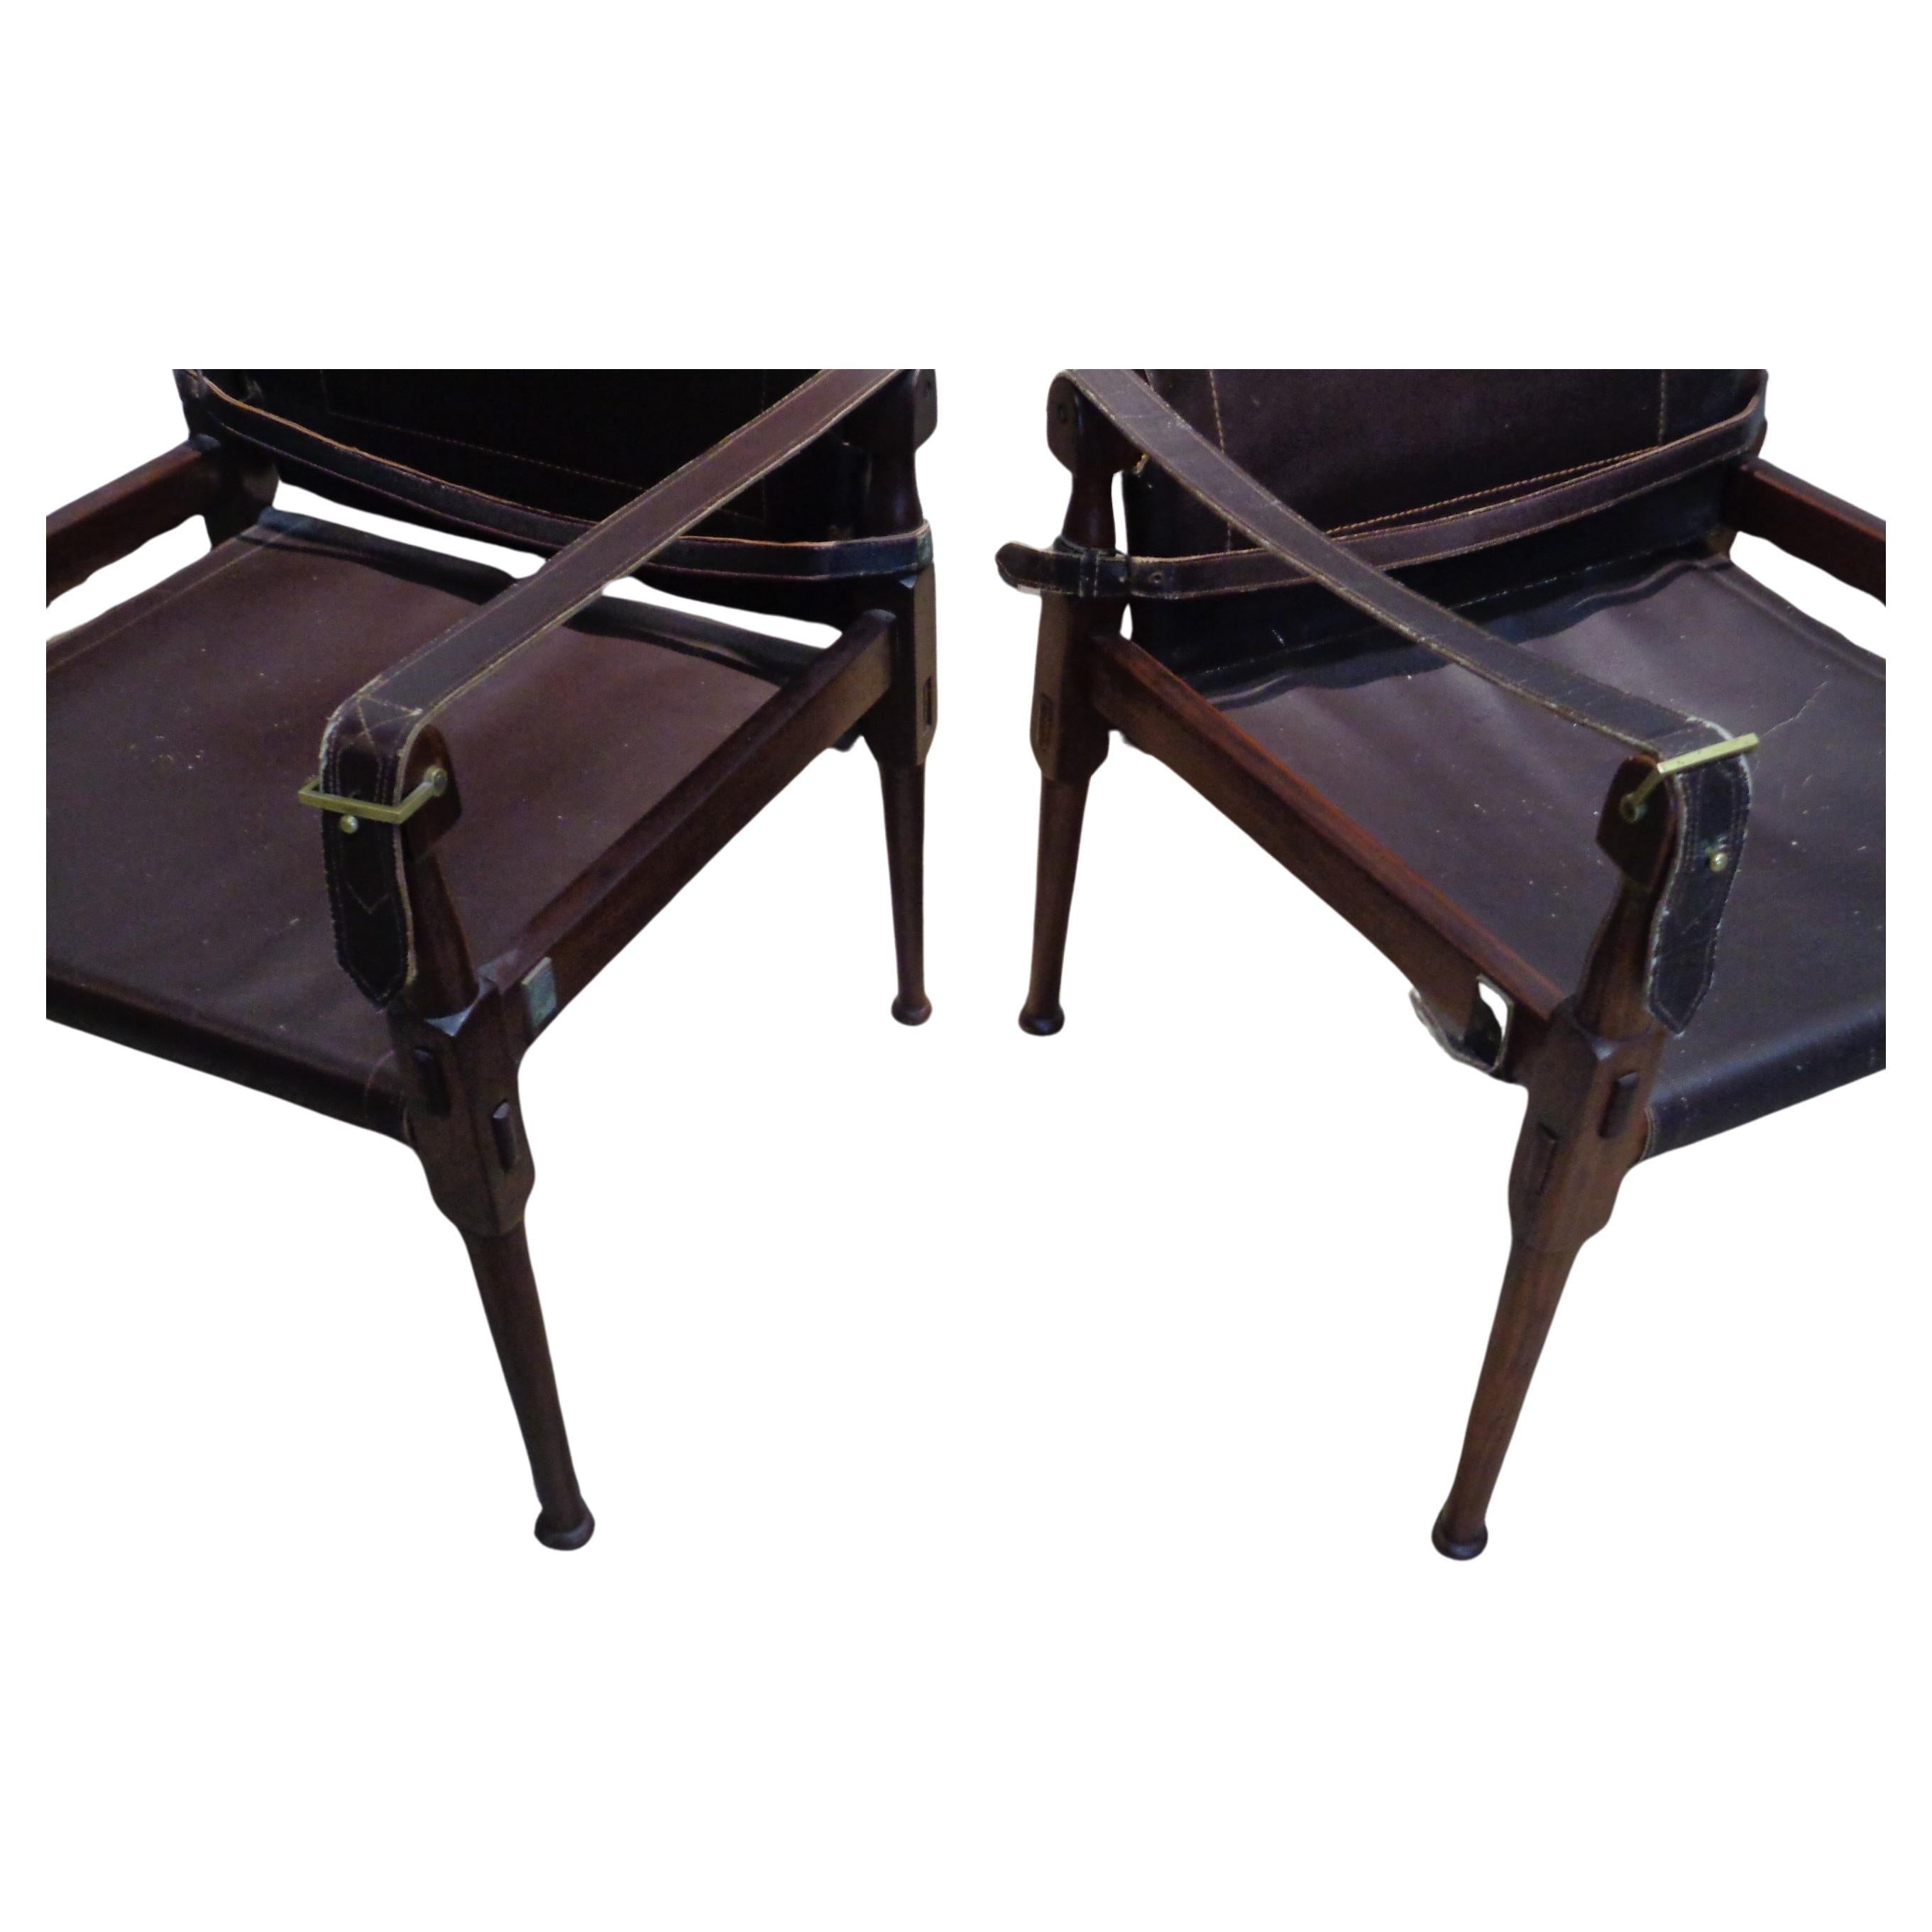 Hand-Crafted  Campaign Style Safari Chairs, M. Hayat & Bros. 1960-1970 For Sale